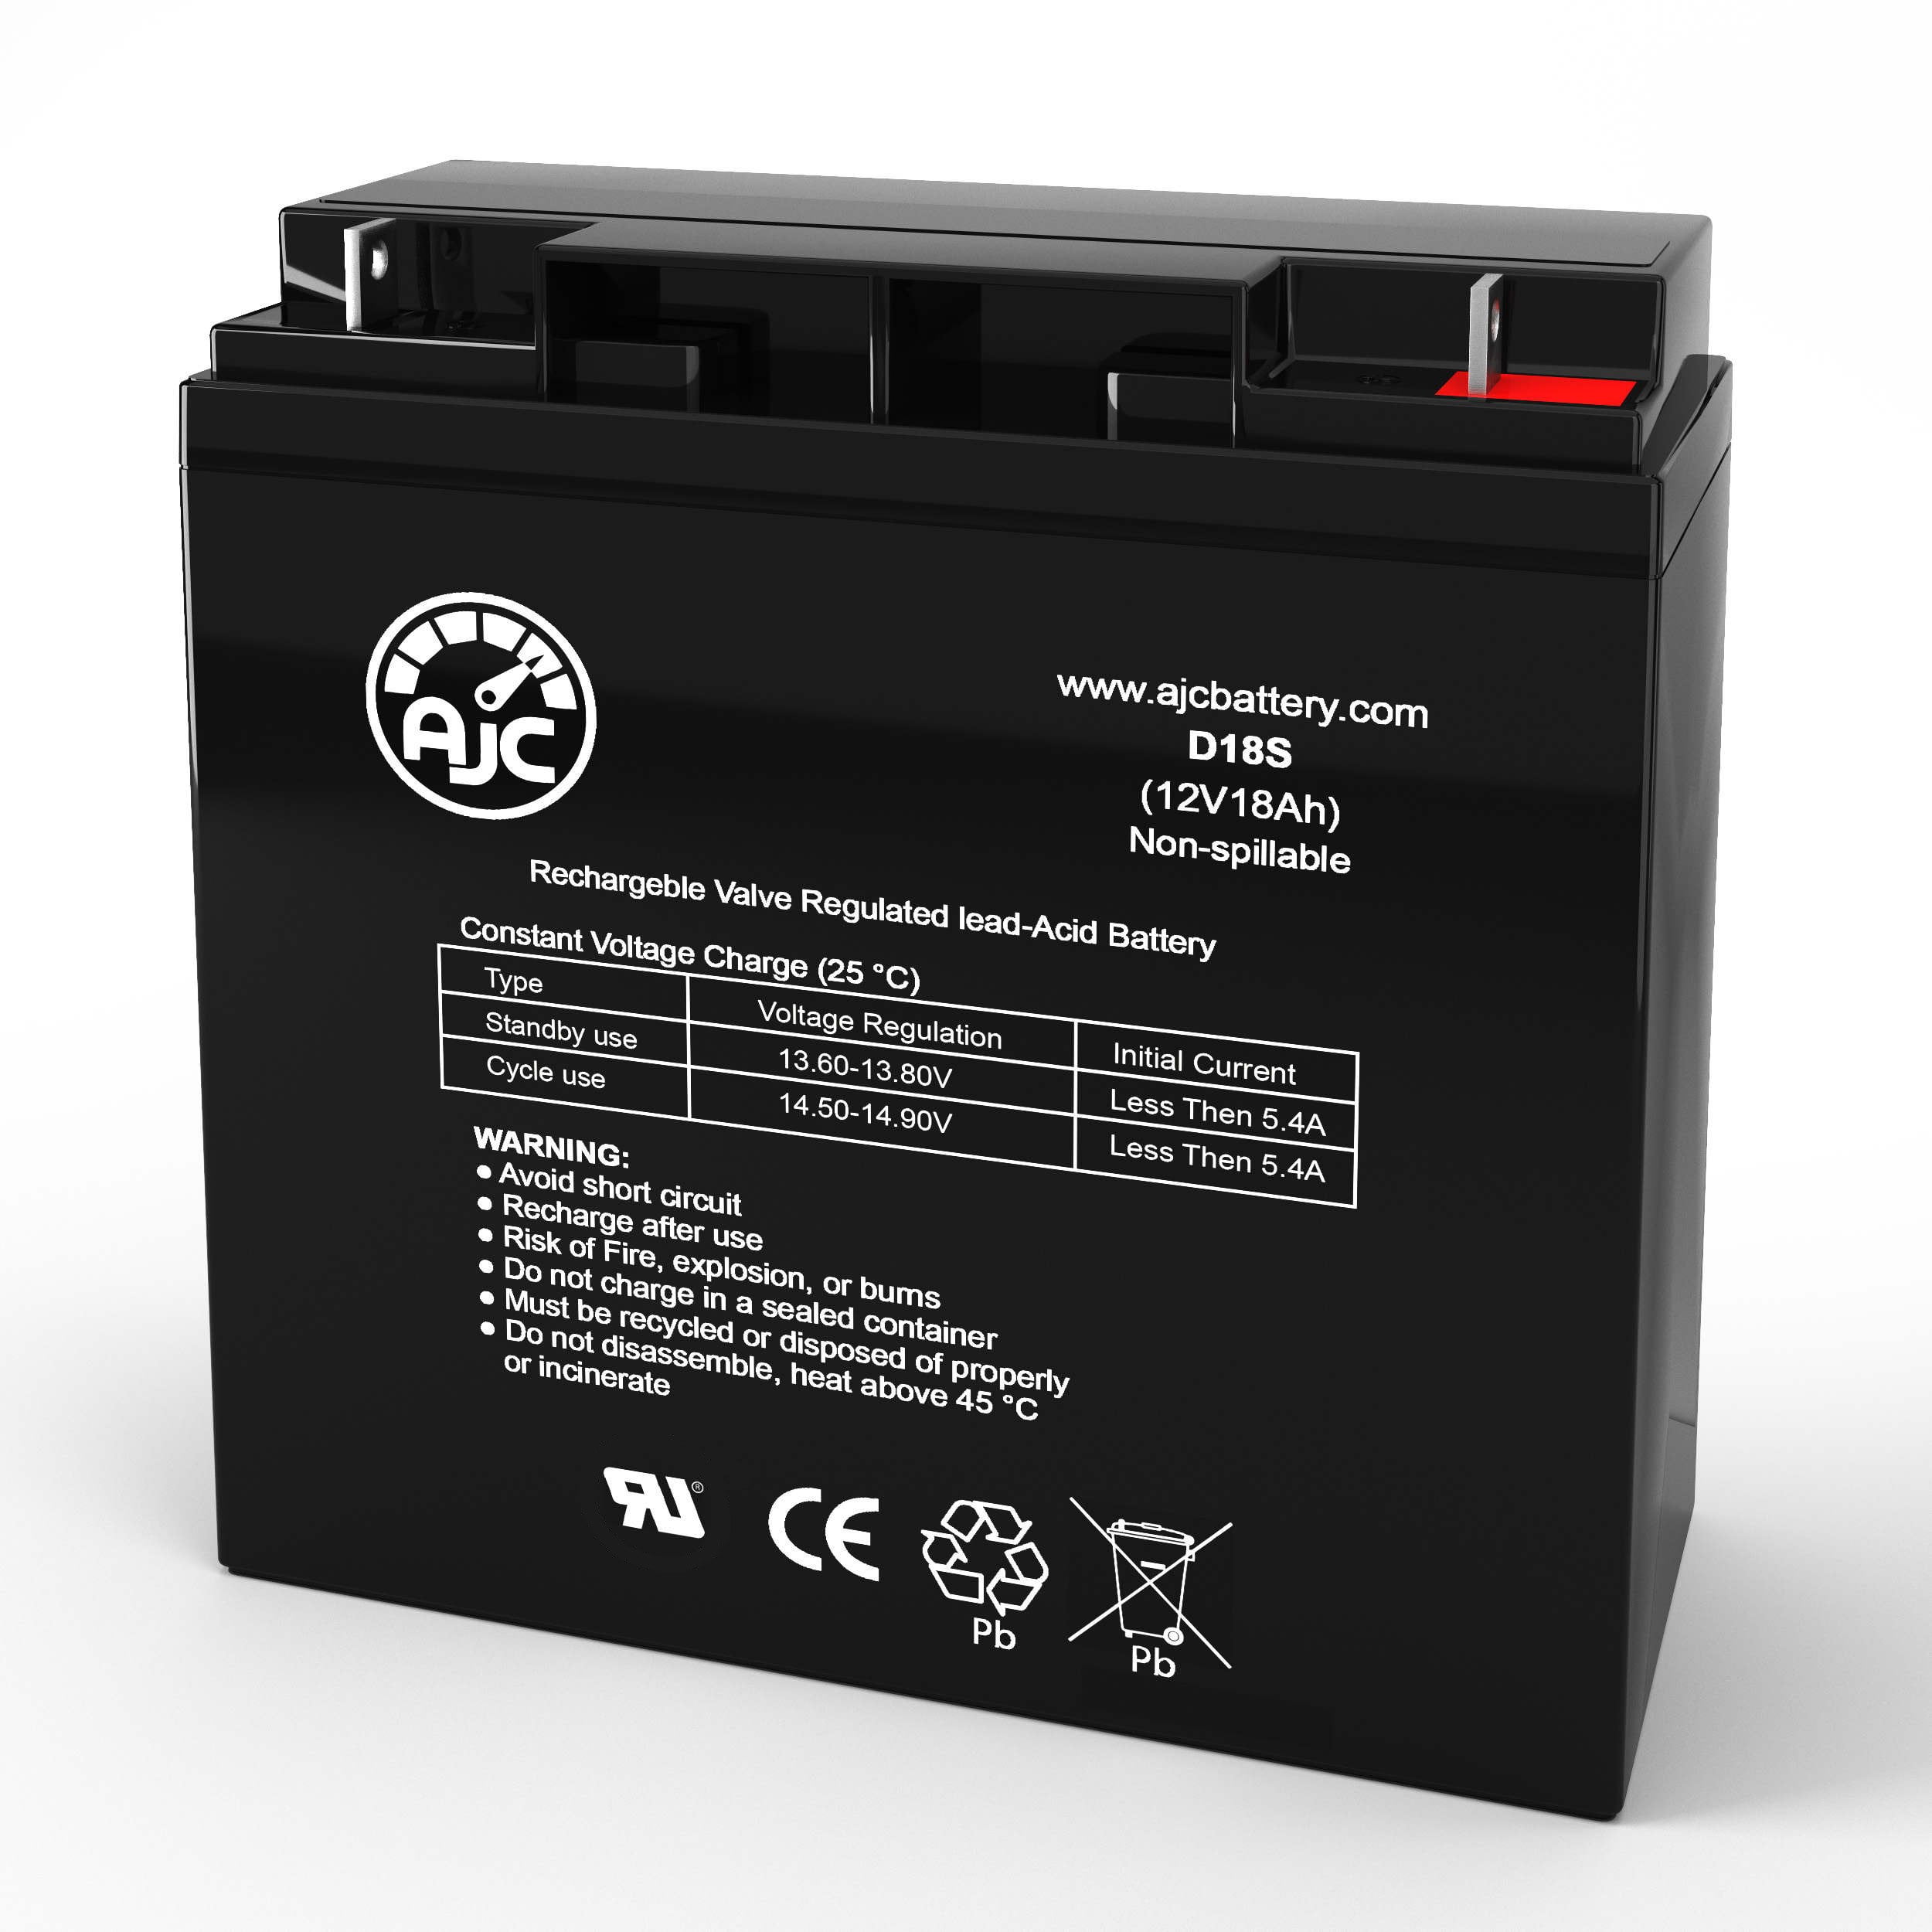 Duracell DURA12-18NB 12V 18Ah Sealed Lead Acid Battery - This Is an AJC Brand Replacement